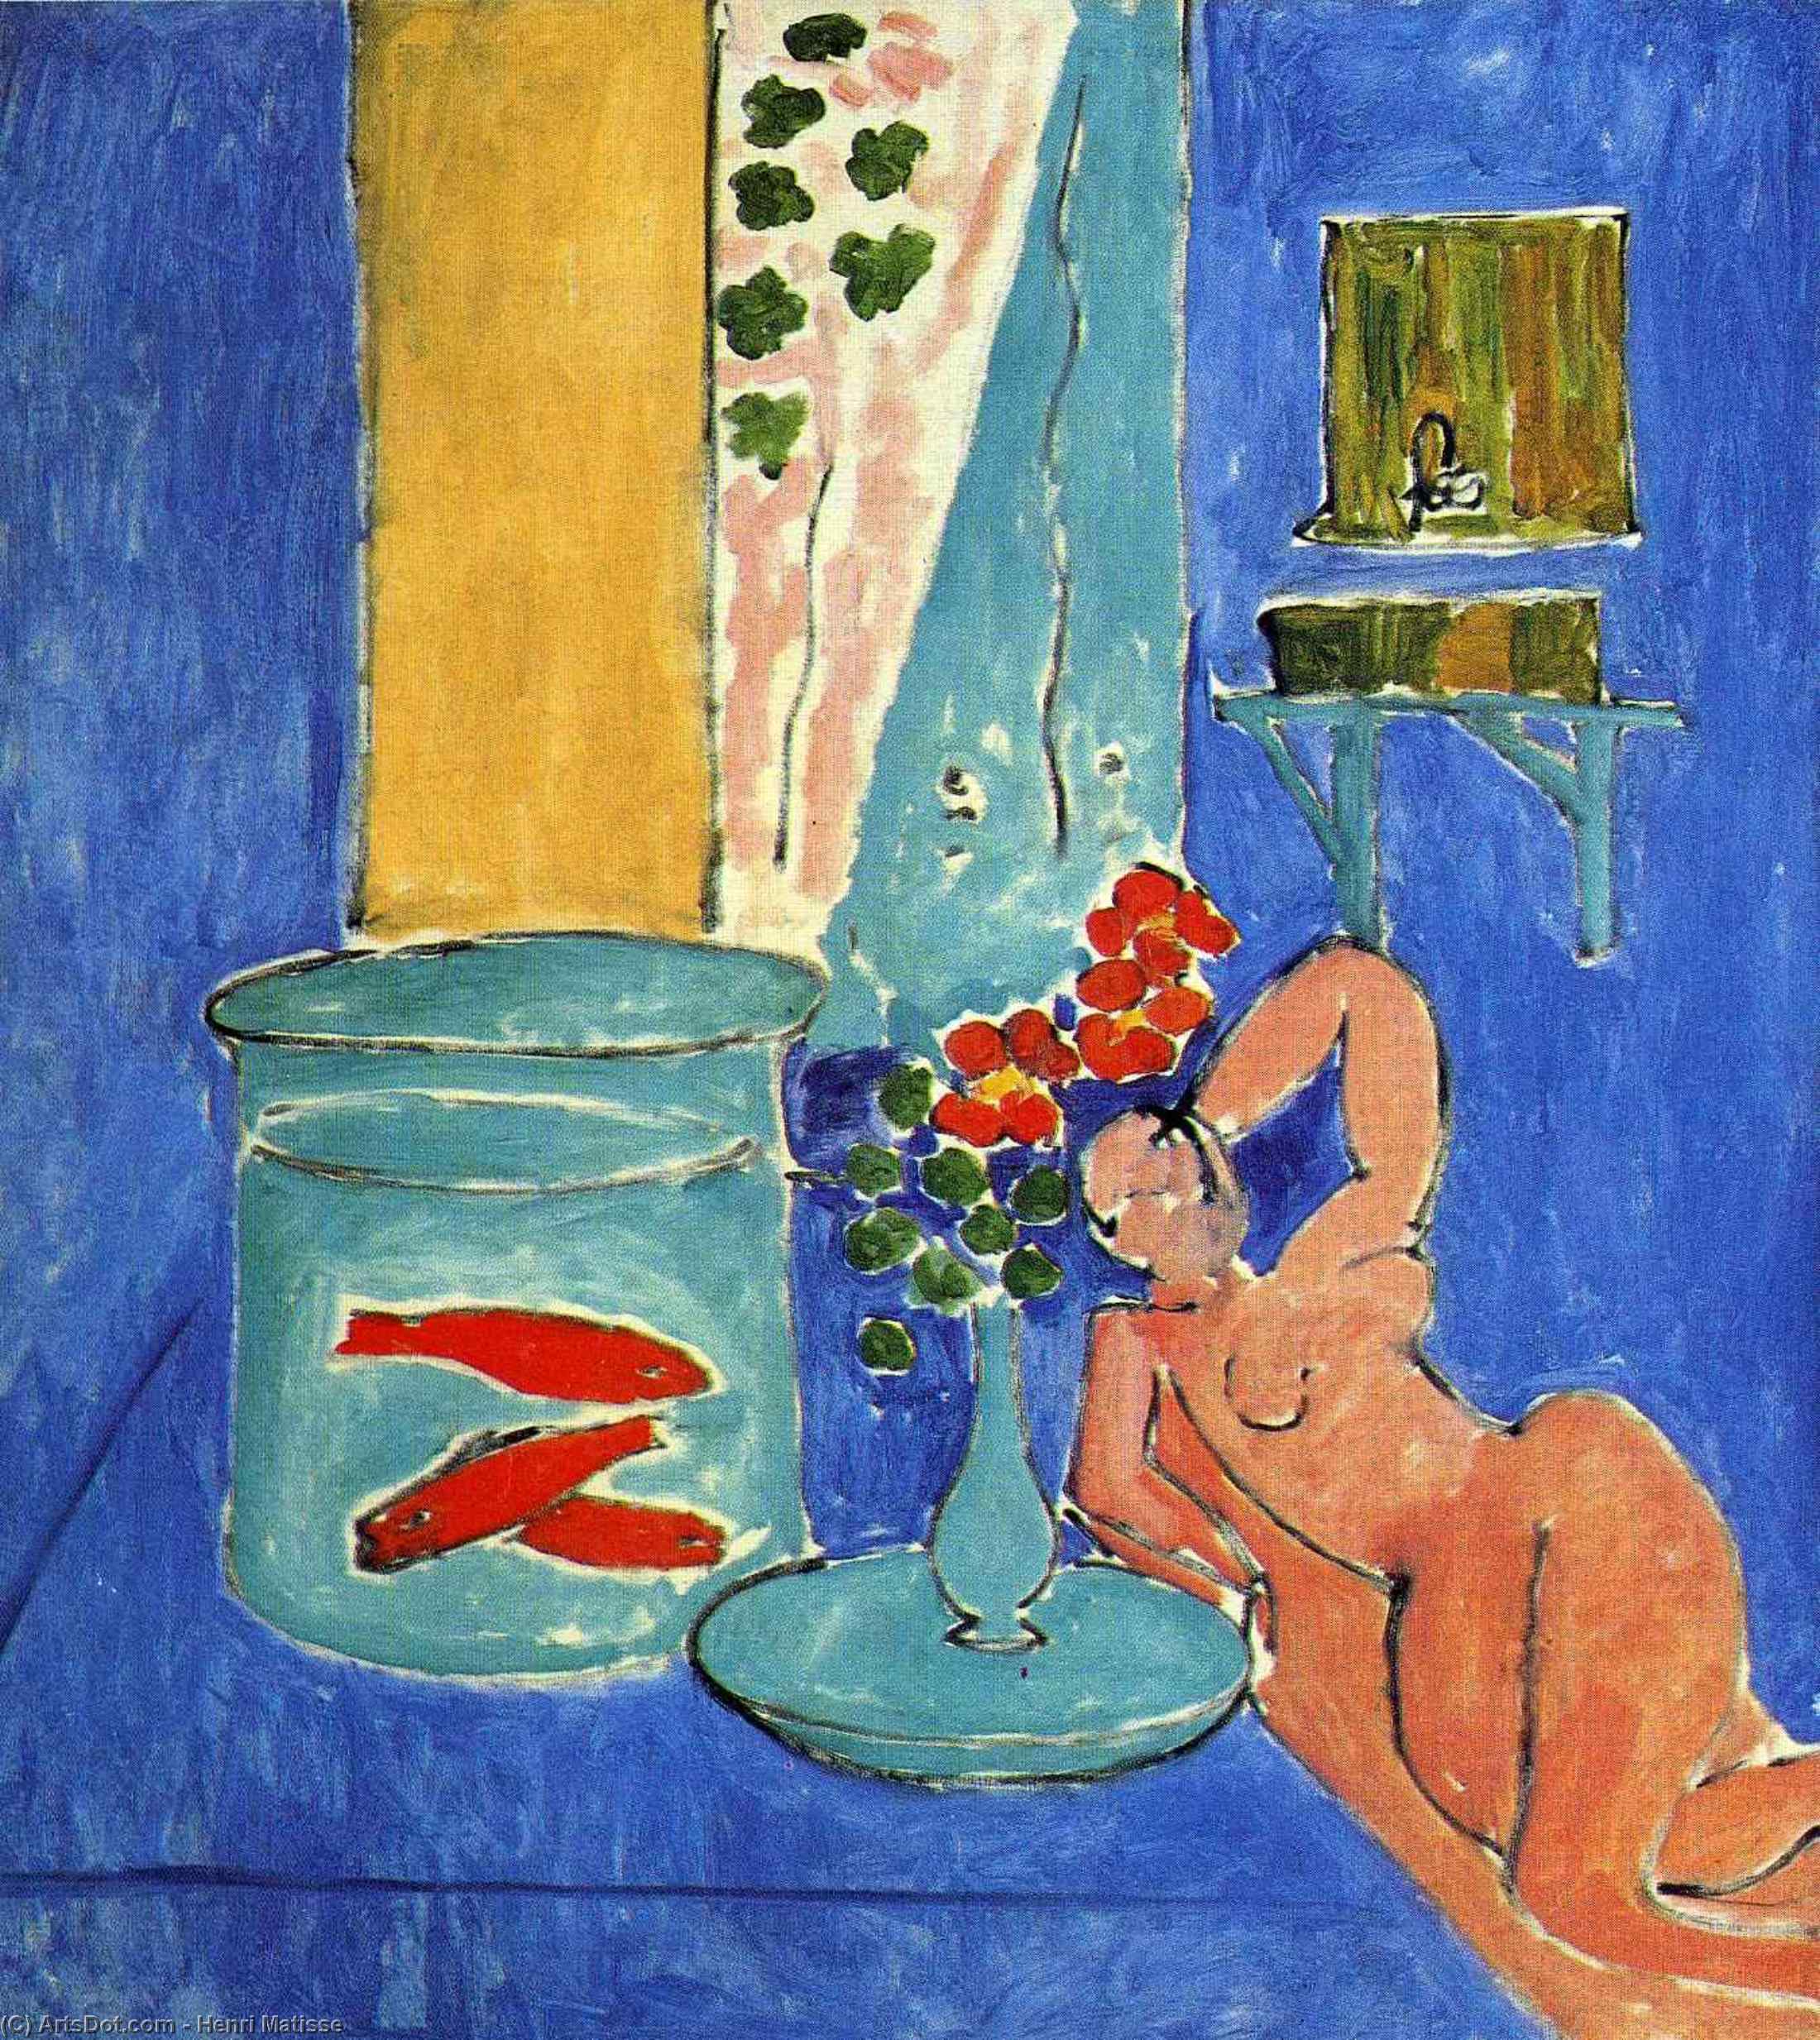 WikiOO.org - Encyclopedia of Fine Arts - Malba, Artwork Henri Matisse - Red Fish and a Sculpture